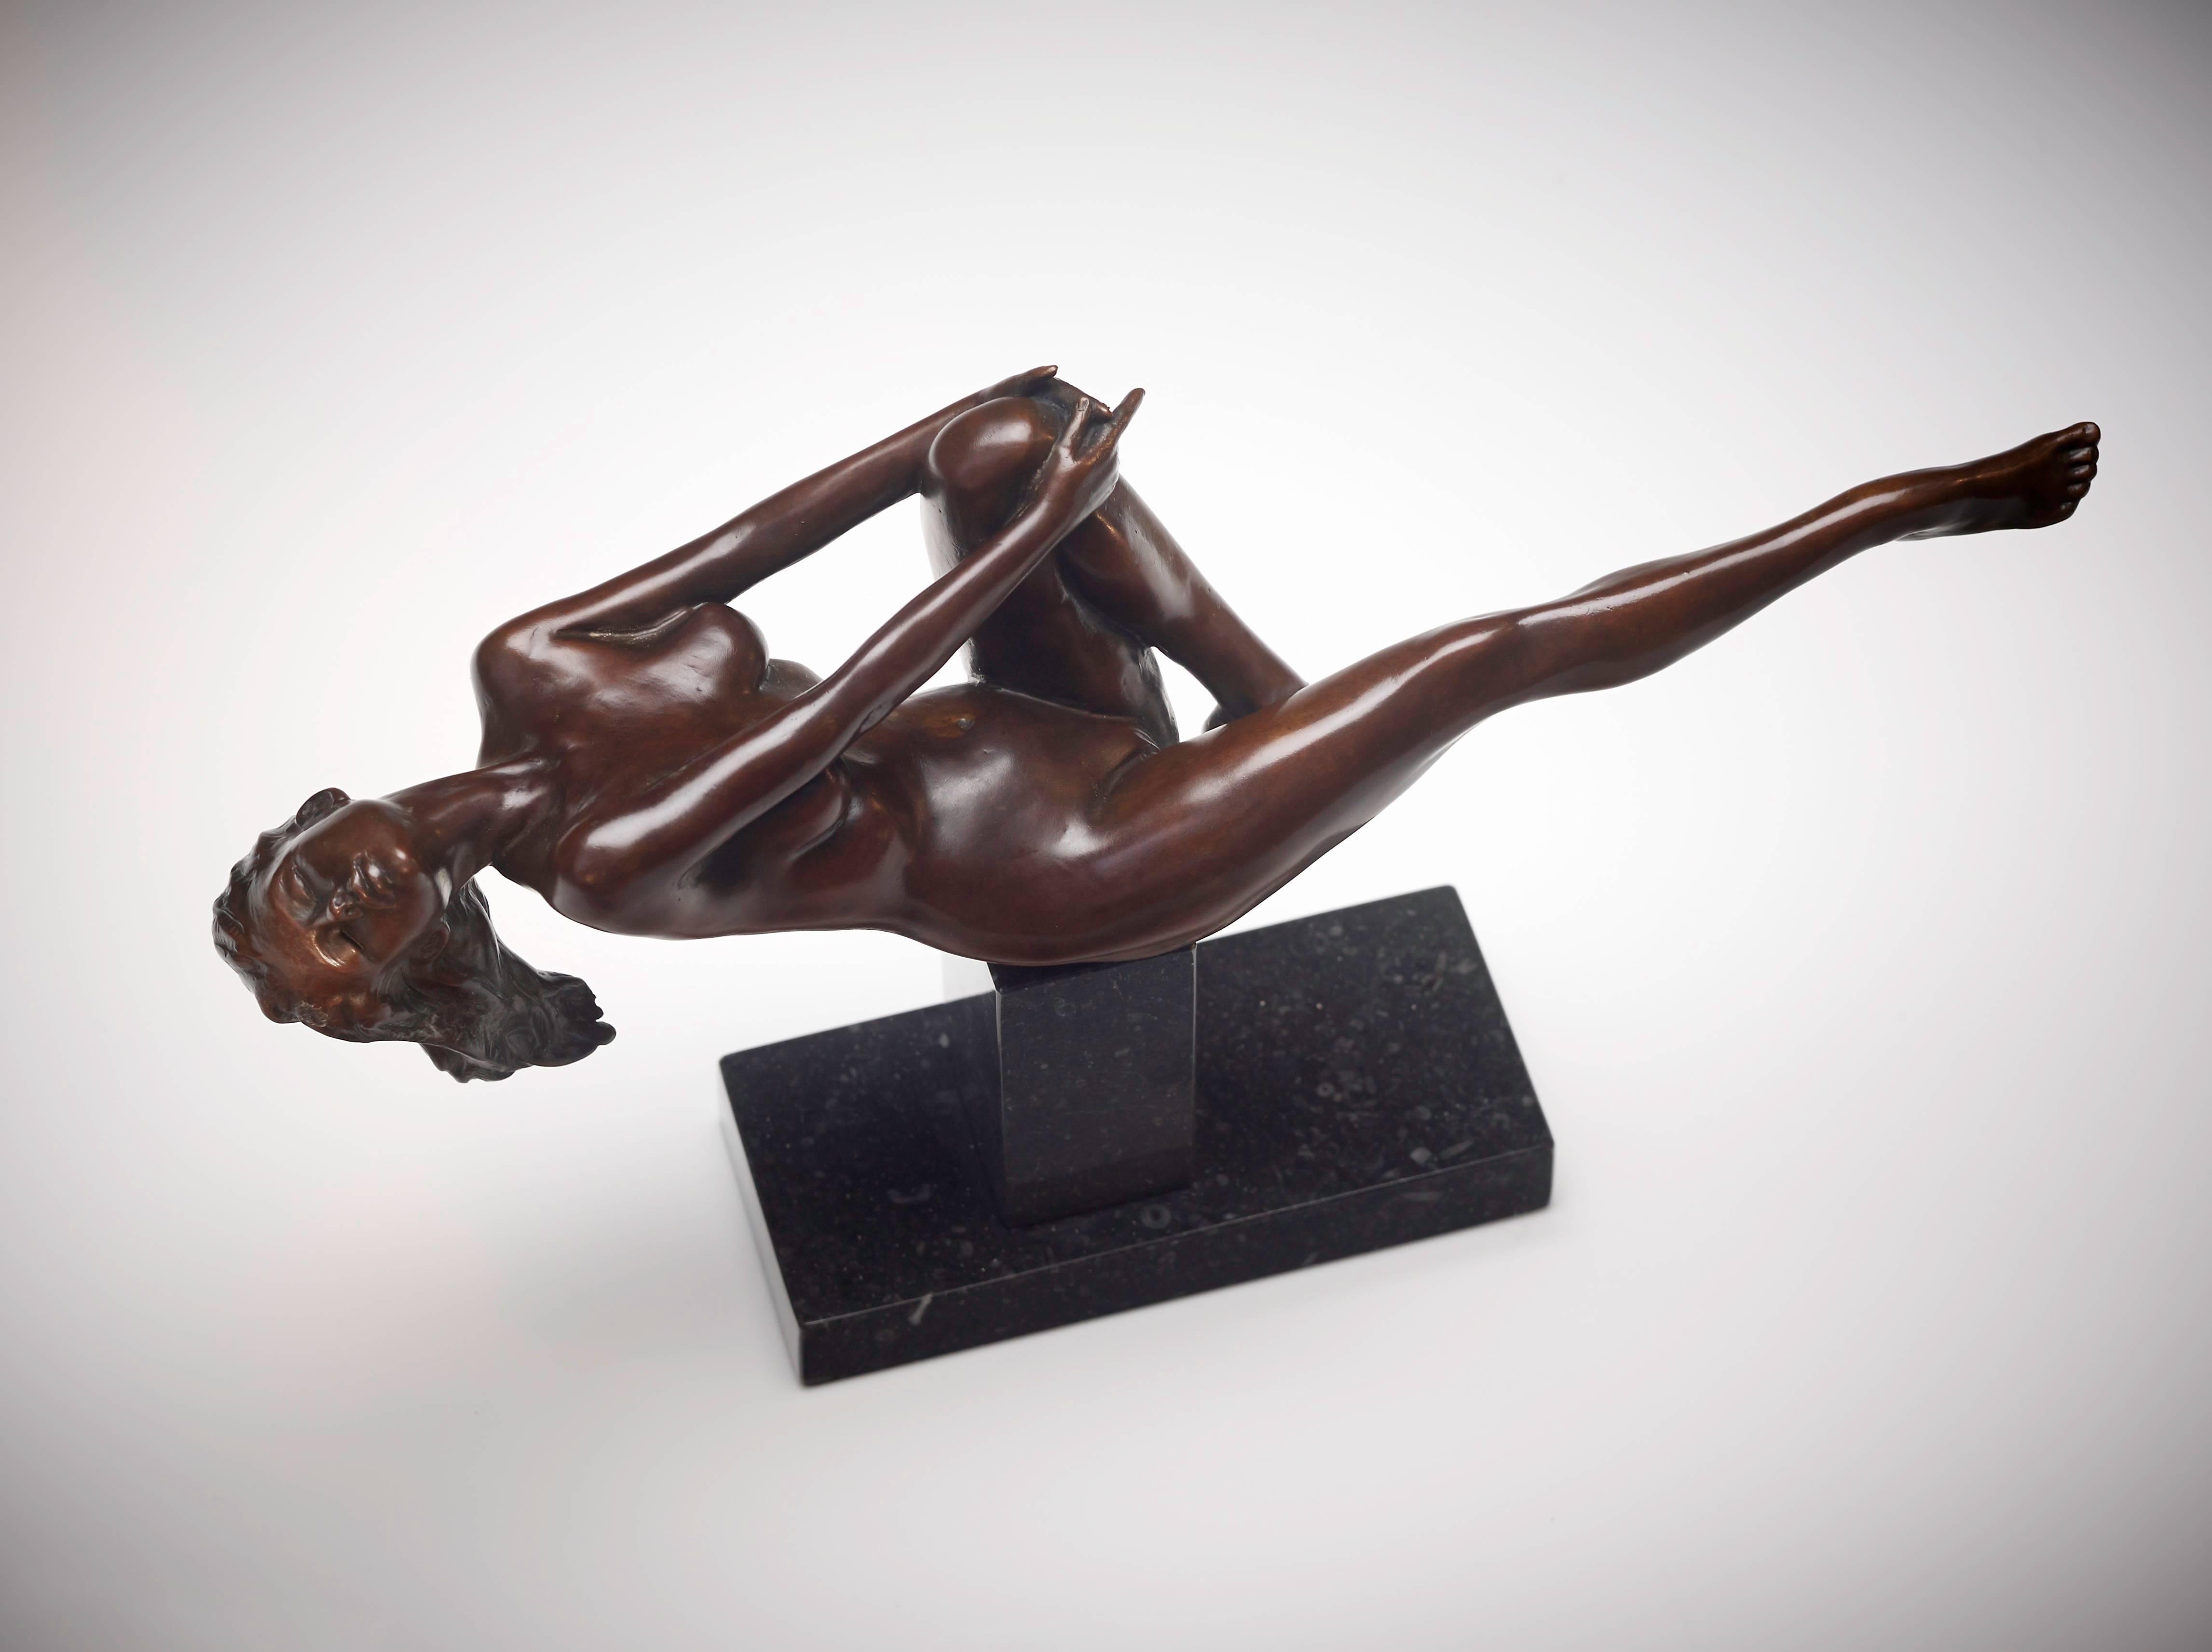 'Spirit' by Carl Payne is a 20th Century Solid Bronze Nude Figurative Sculpture.

Carl is a Staffordshire based sculptor for whom art has played a large part in his academic work taking him through the Burslem School of Art, the Henry Doulton School